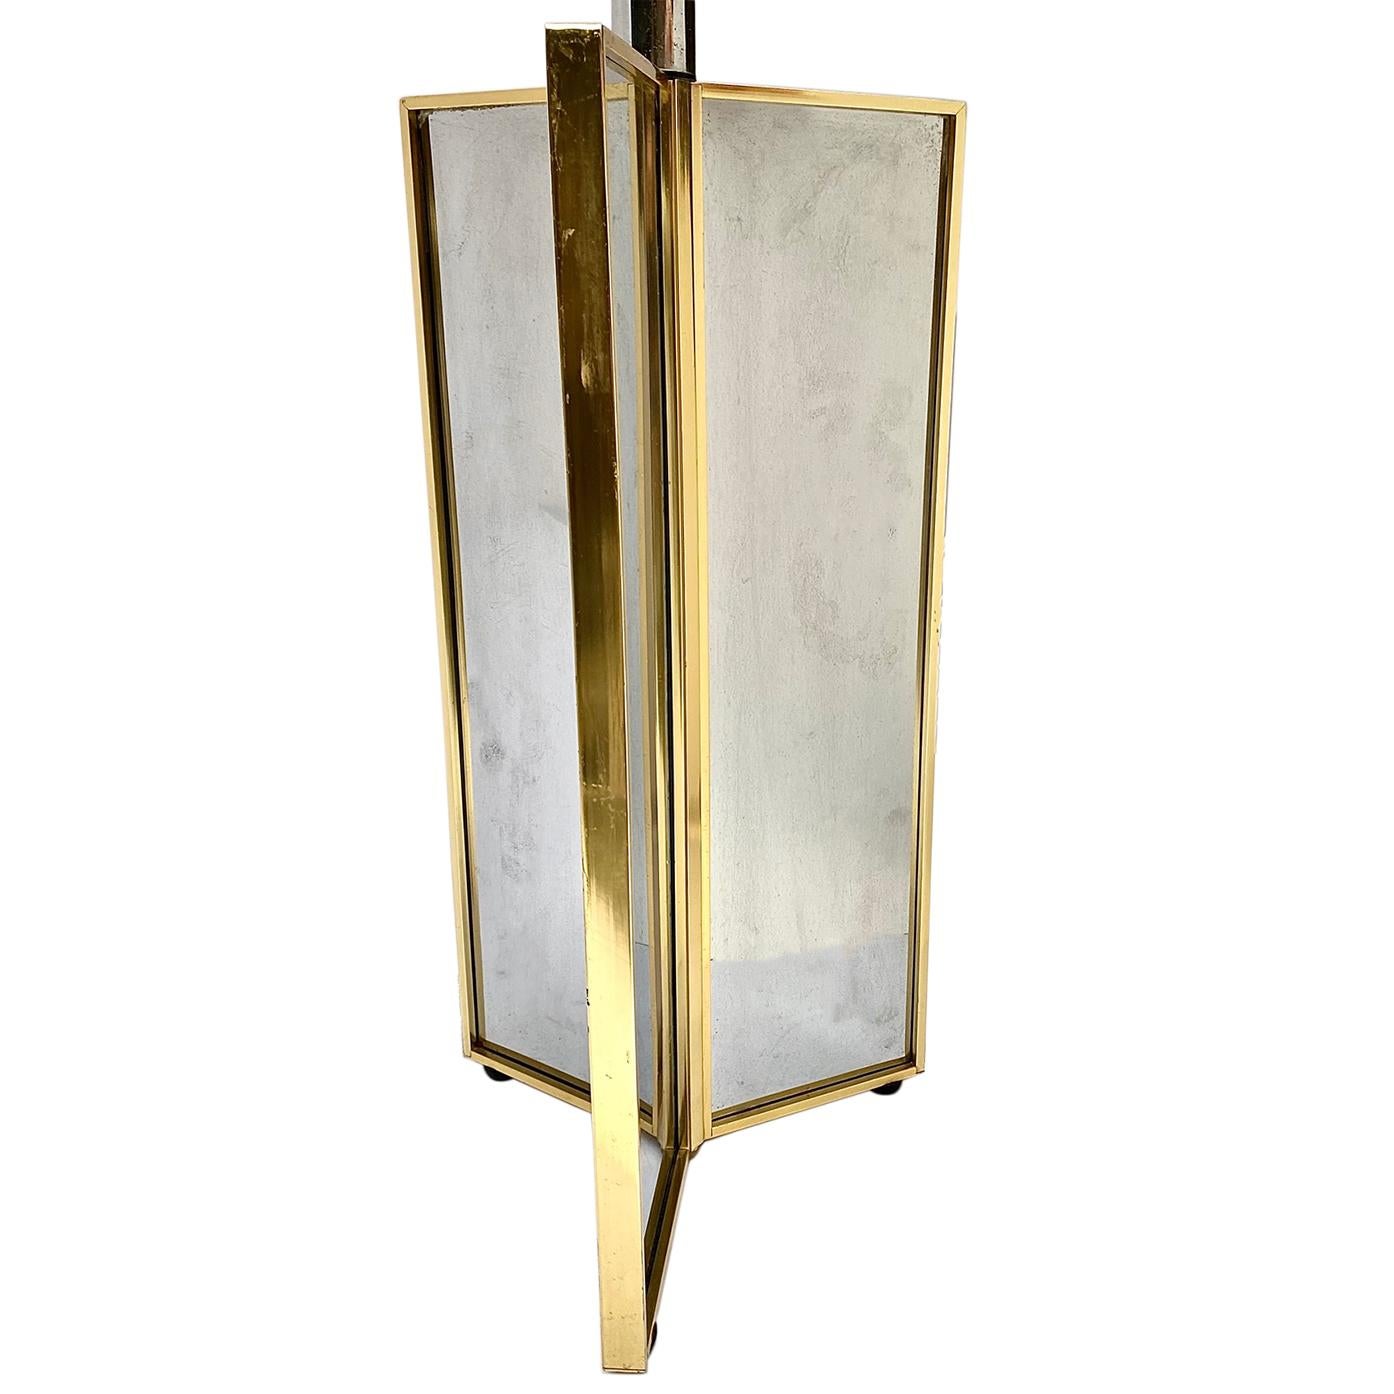 A single circa 1970's French mirrored table lamp with brass details.

Measurements:
Height of body: 19